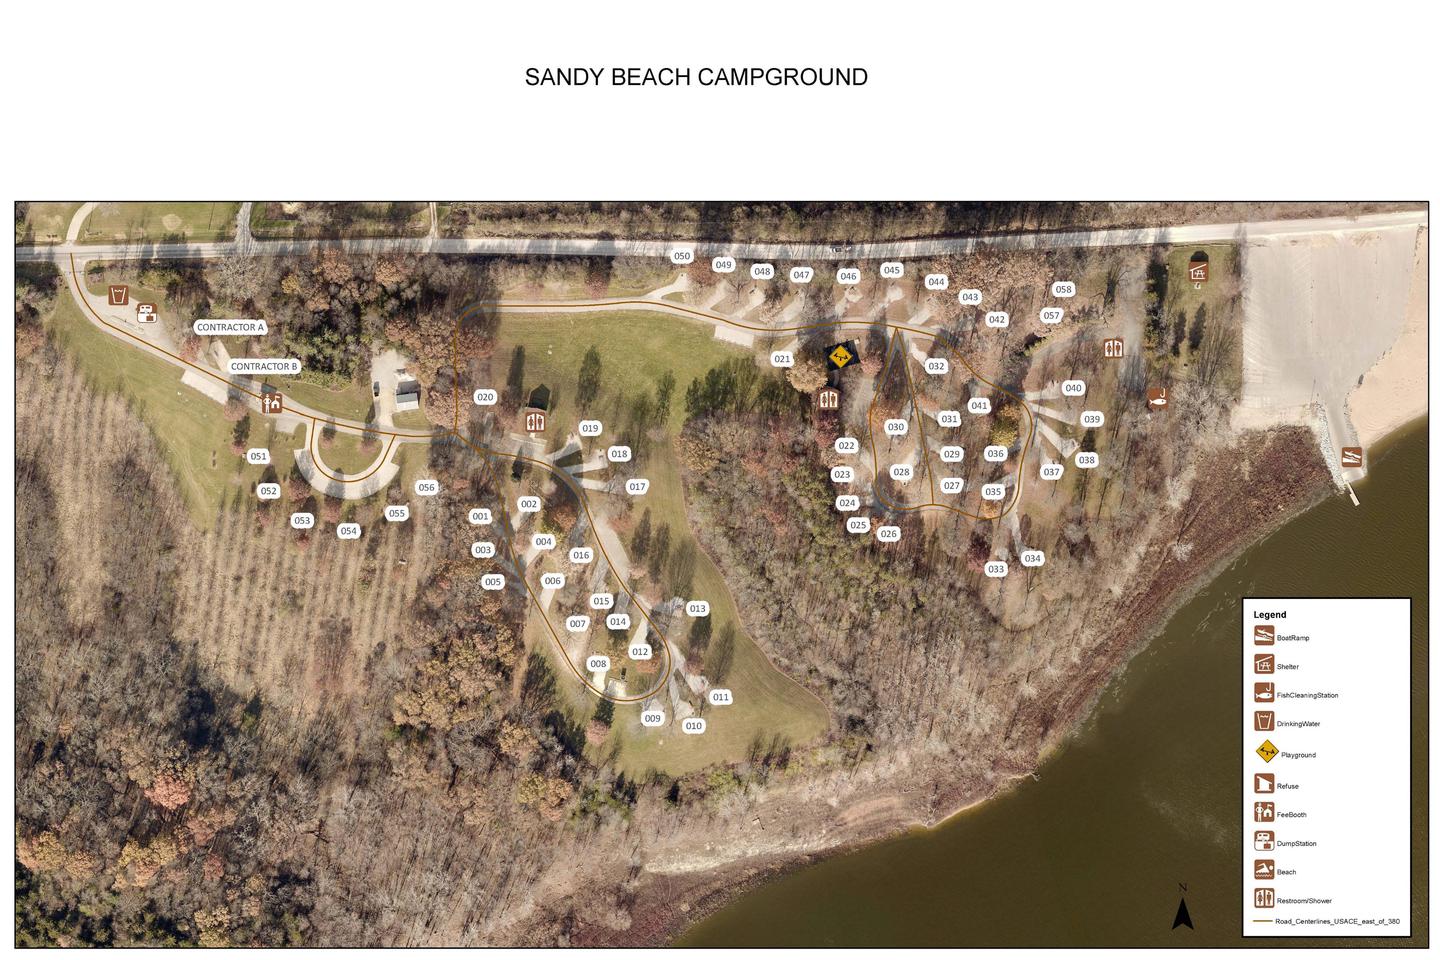 Preview photo of Sandy Beach Camp